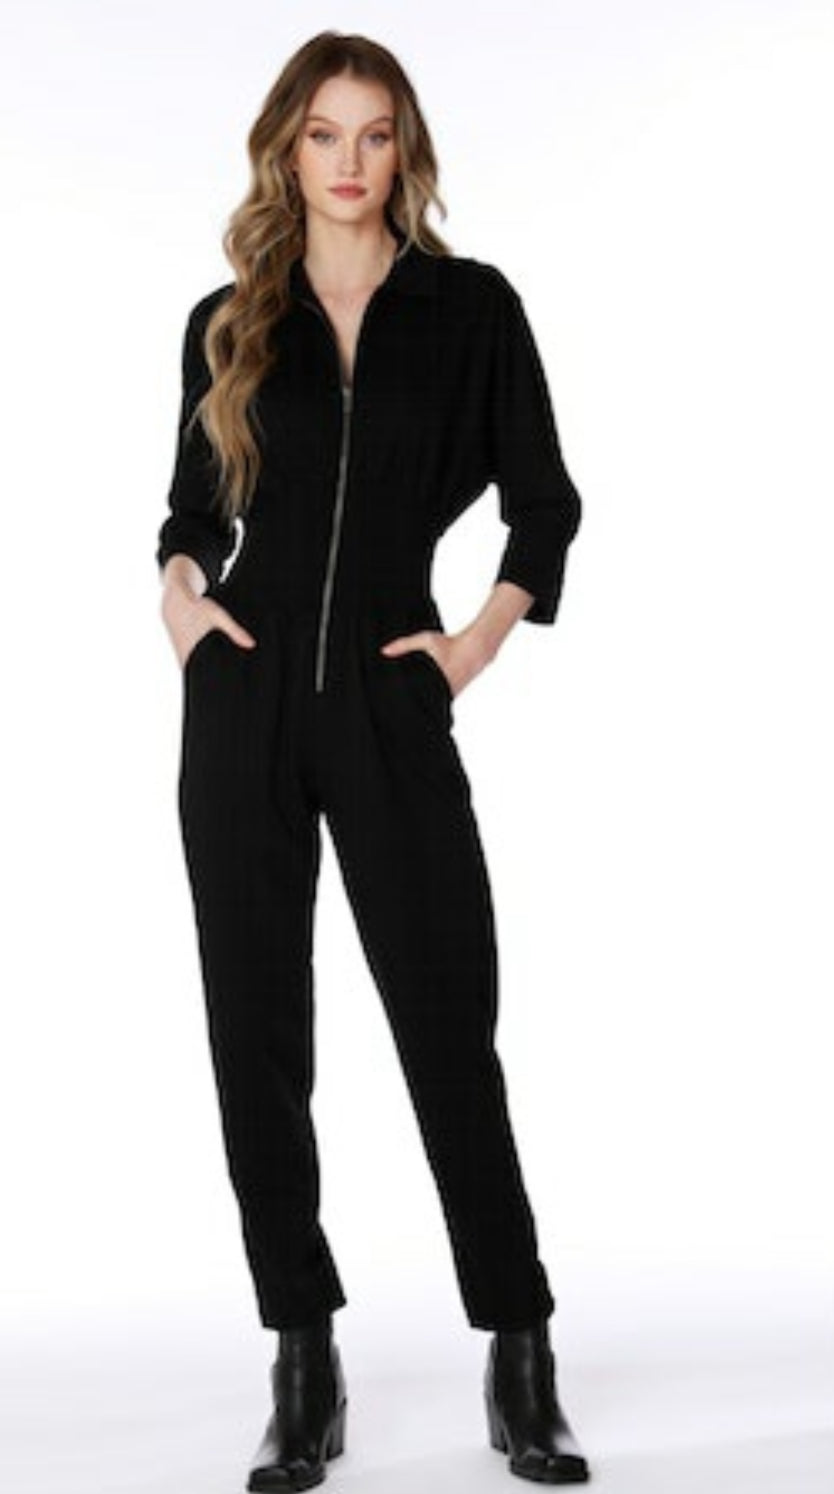 Bobi Smocked Waist Zip Front Jumpsuit Black -  - Wild Willows Boutique - Massapequa, NY, affordable and fashionable clothing for women of all ages. Bottoms, tops, dresses, intimates, outerwear, sweater, shoes, accessories, jewelry, active wear, and more // Wild Willow Boutique.